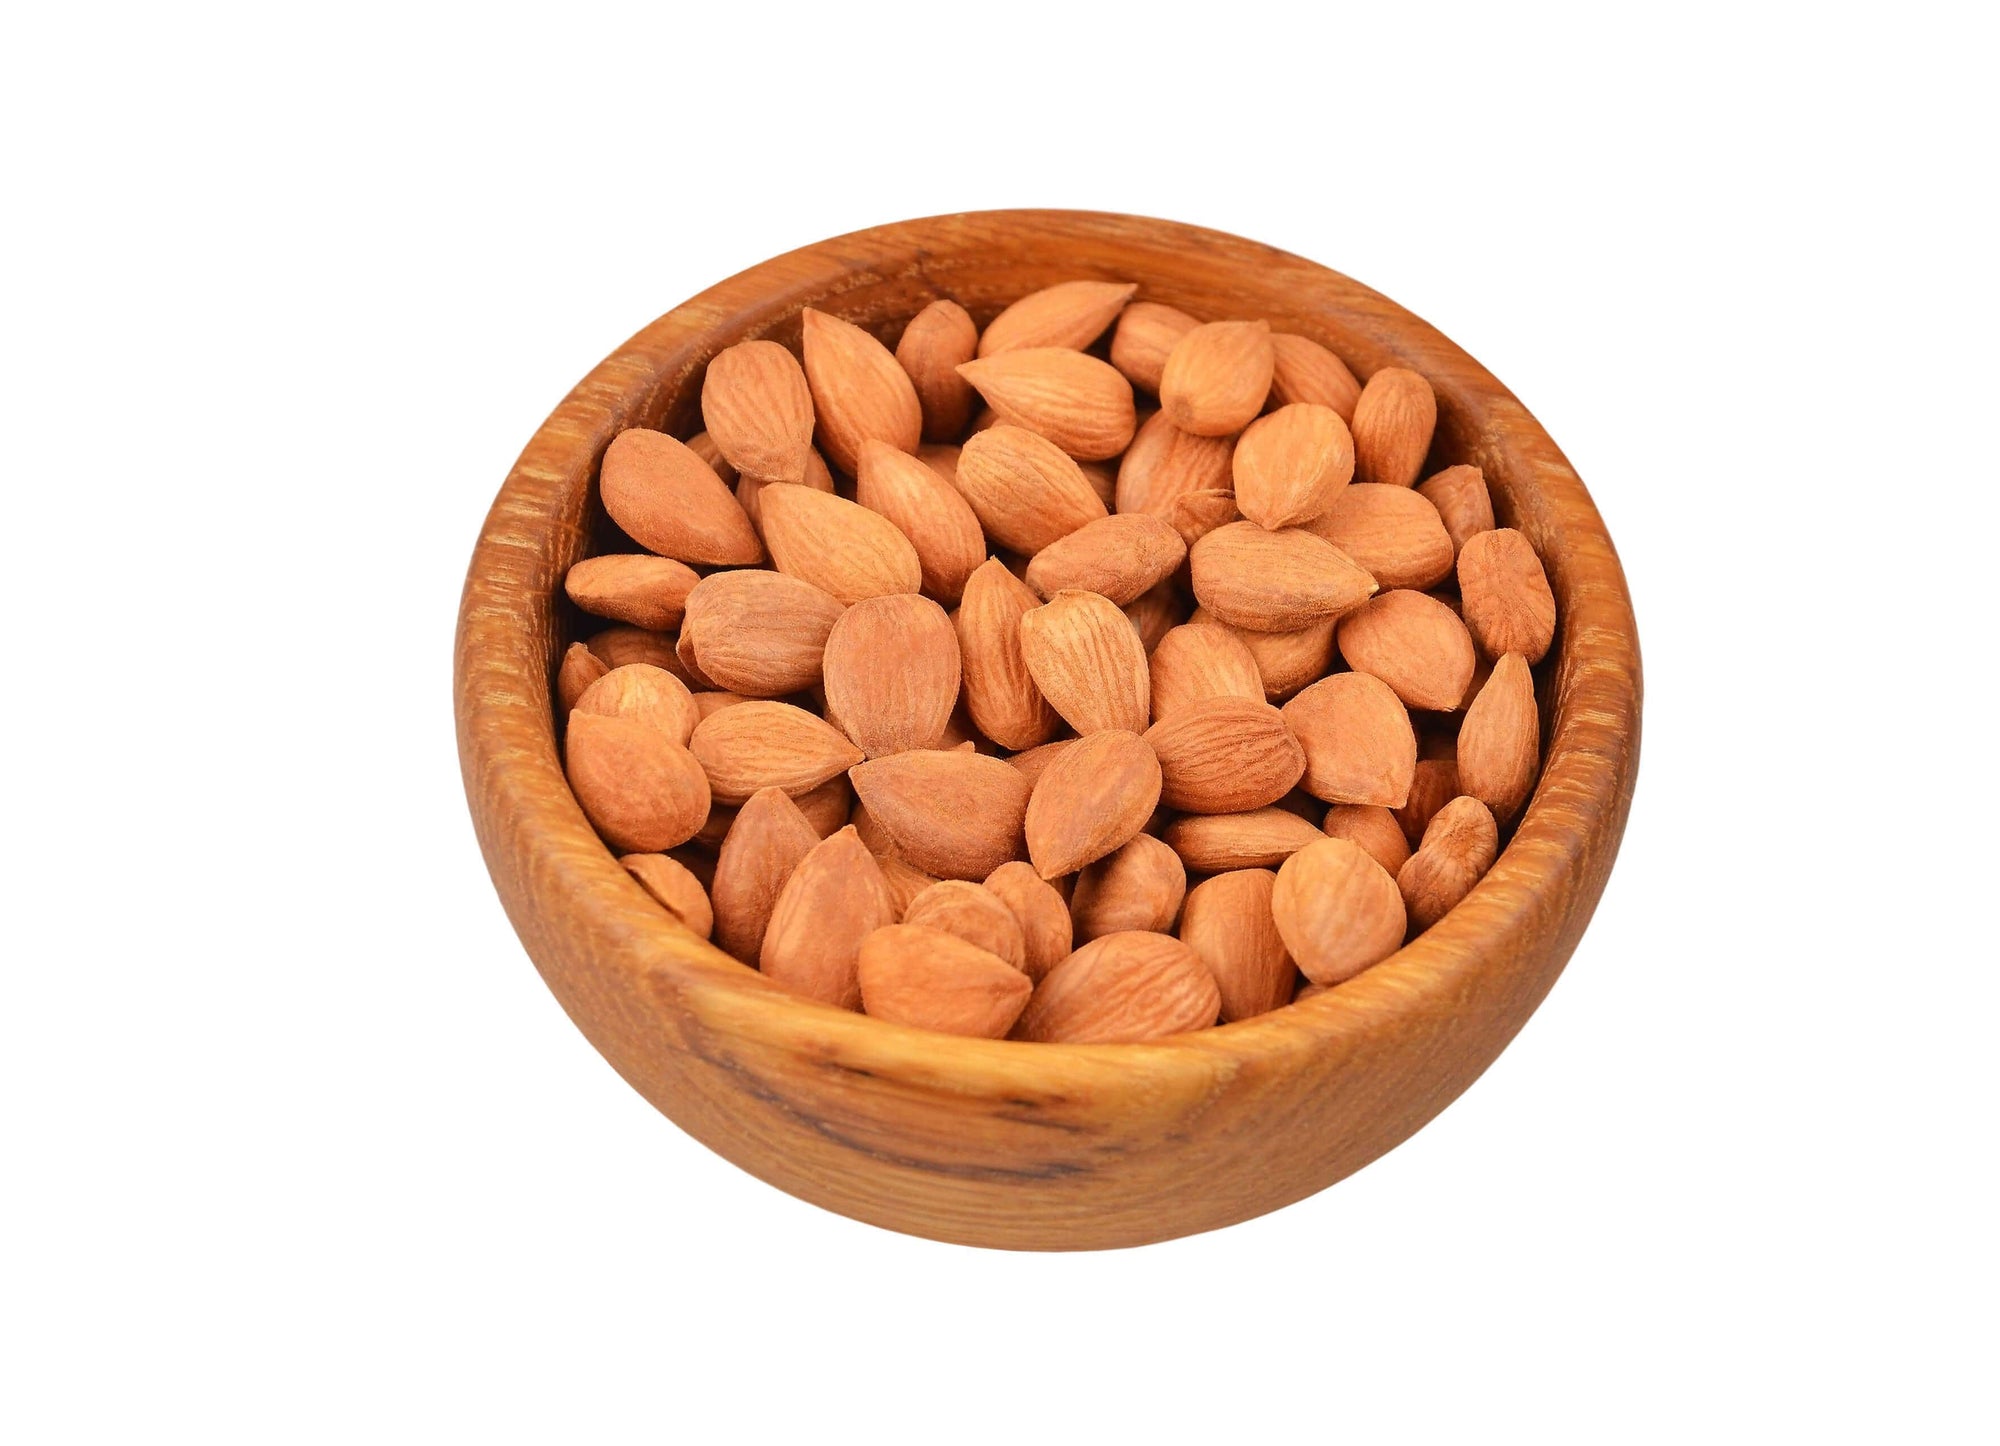 Nutritionally, apricot seeds are similar to other nuts — they’re rich in healthy fats and provide some fiber and iron. Seeds or kernels of the apricot grown in central Asia and around the Mediterranean are so sweet that they’re sometimes substituted for a